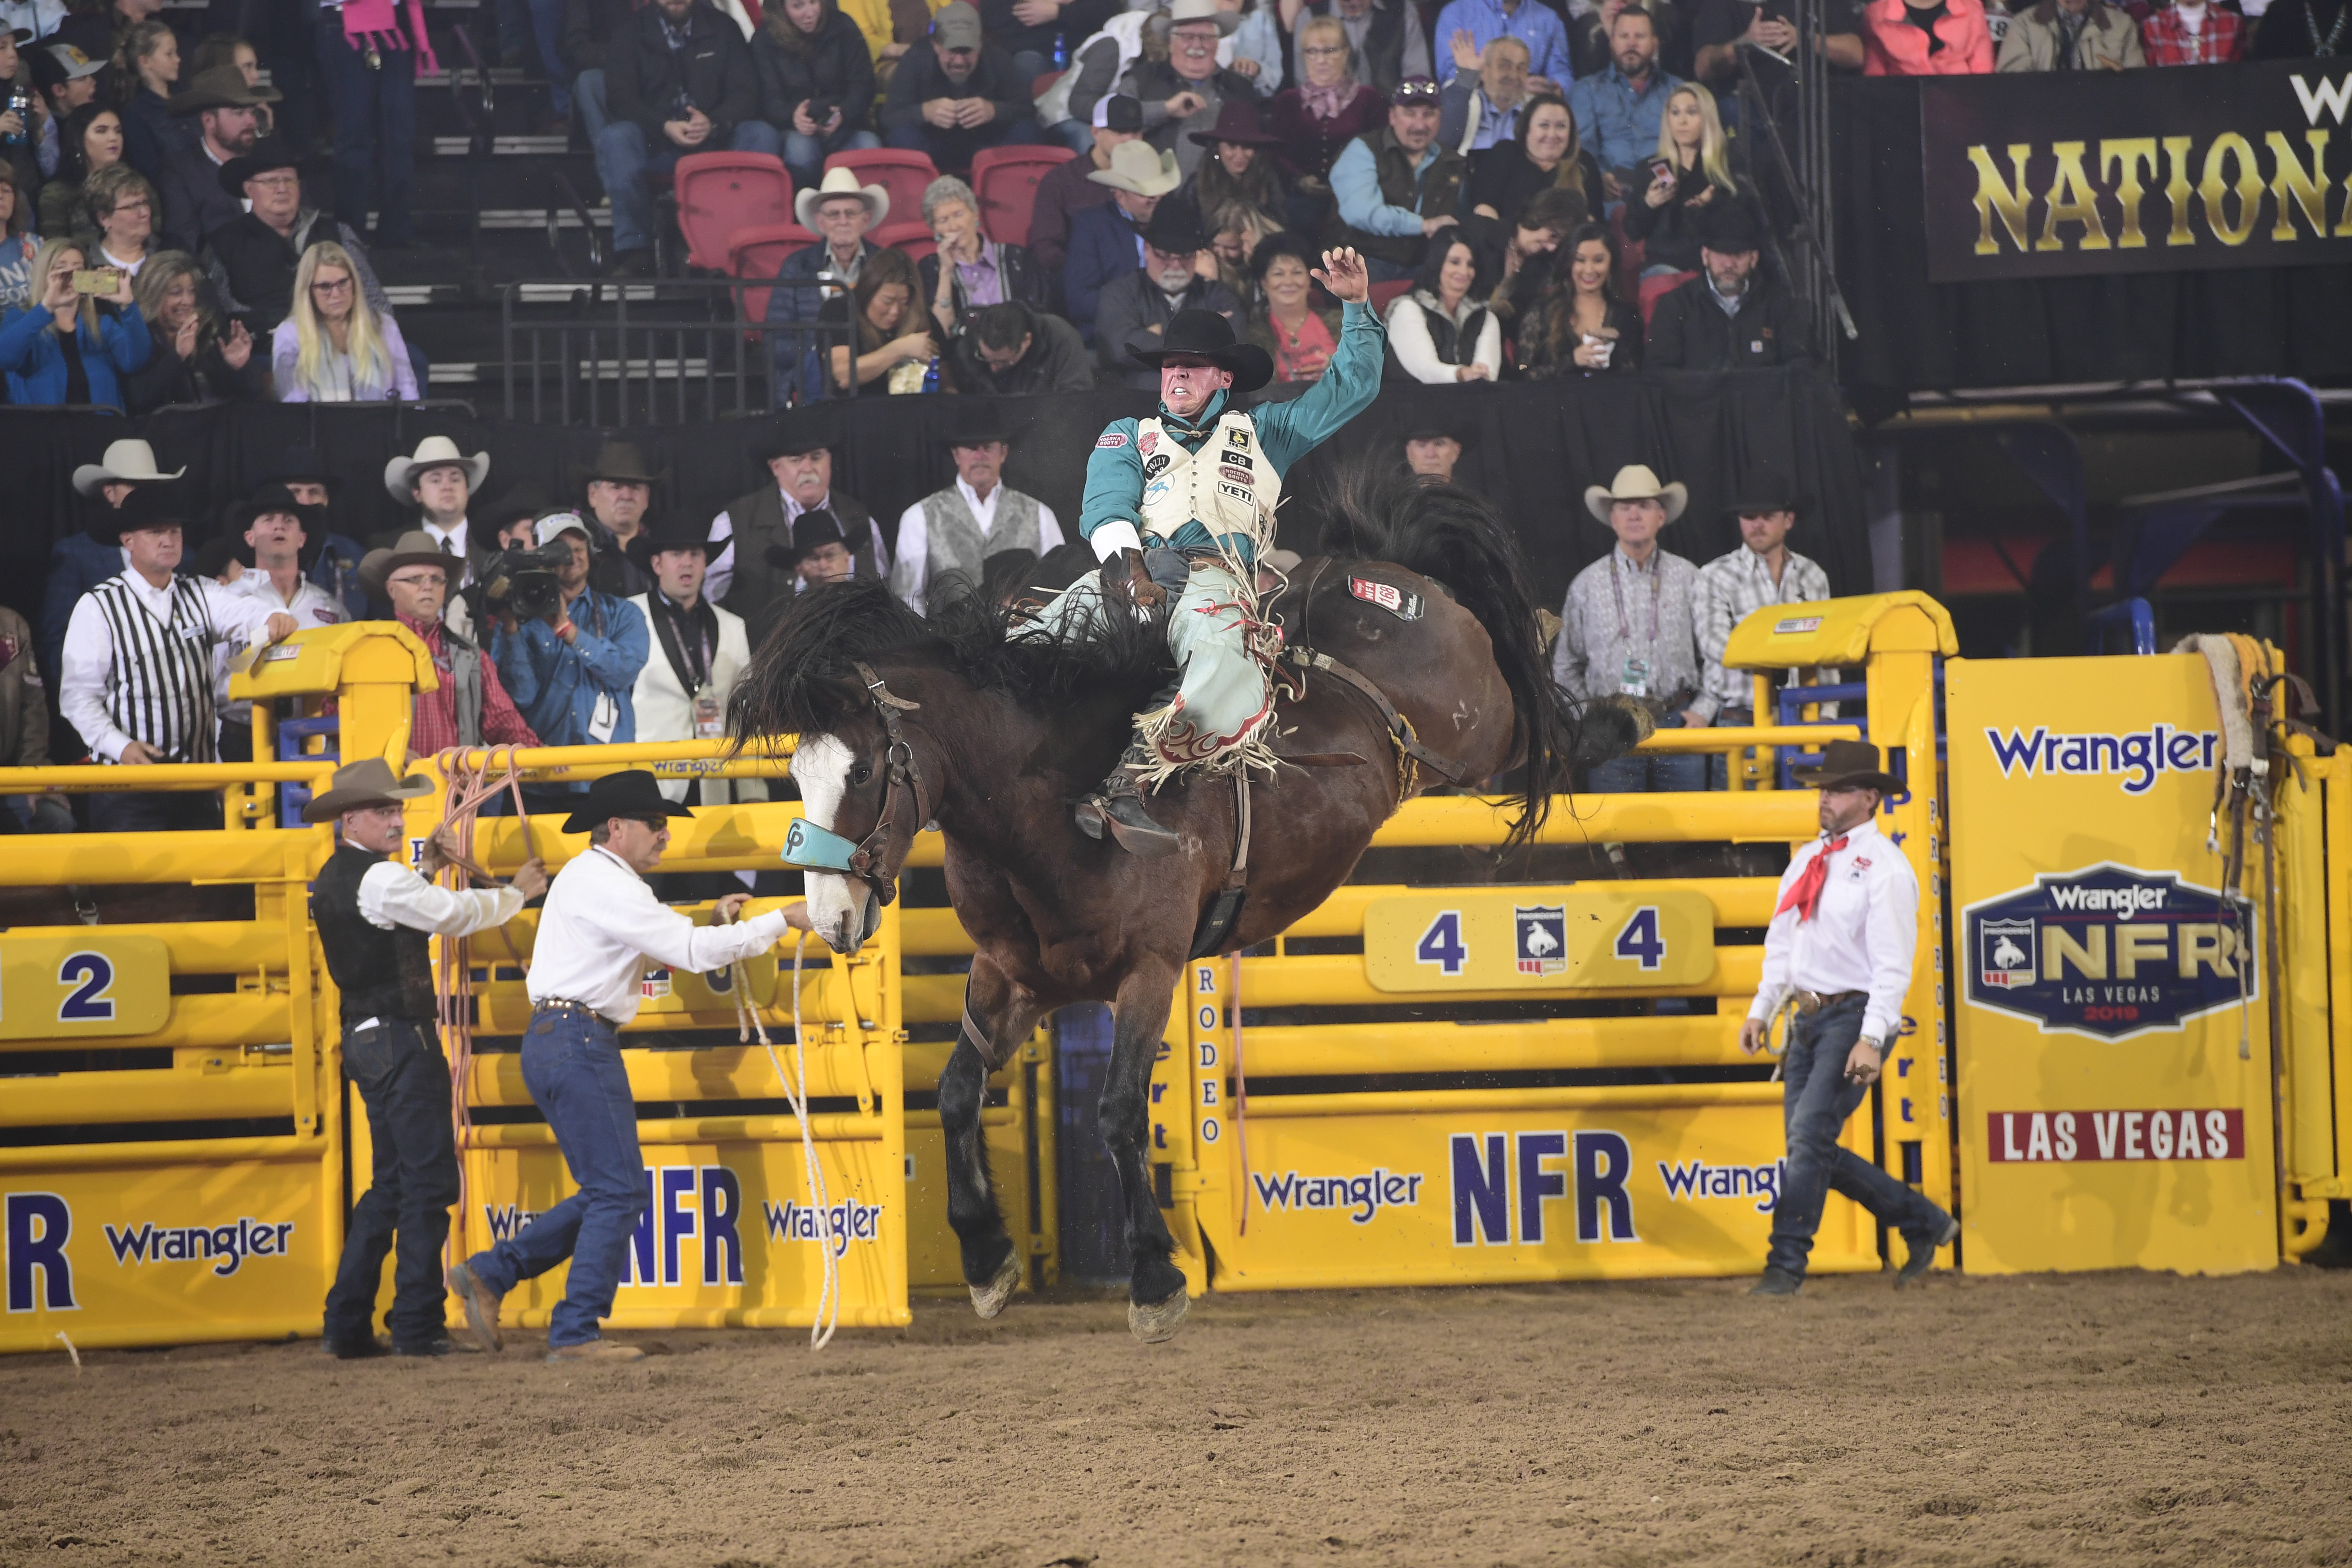 Richmond Champion rides Pickett Pro Rodeo's Faded Night to finish off his National Finals Rodeo third in the average. he earned nearly $110,000 in 10 days. (PRCA PRORODEO PHOTO BY JAMES PHIFER)